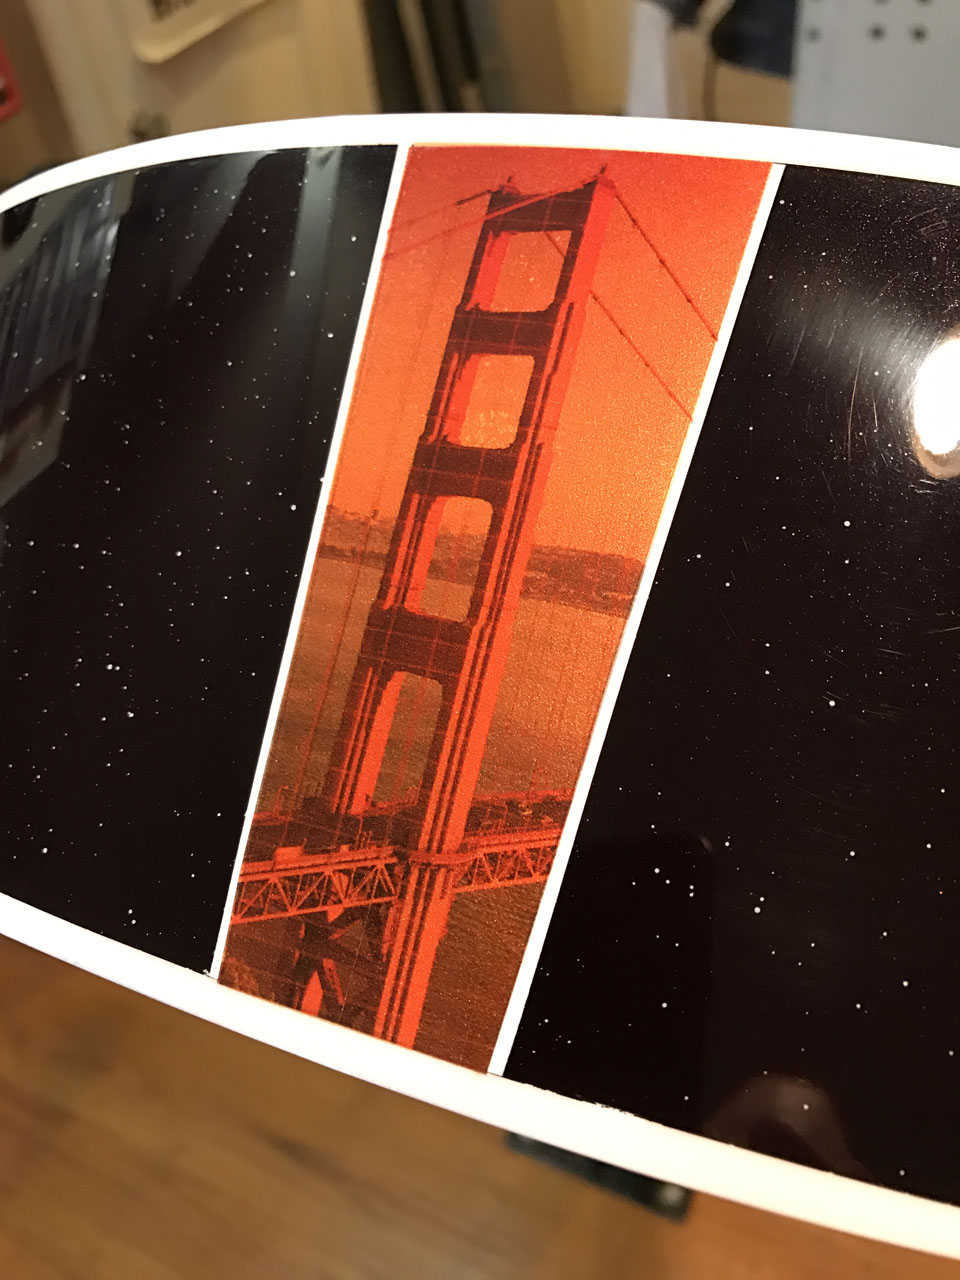 ULTIMATE "FLASH": THE "CALIFORNIA SUNSET" 700C/6 HAS A FULL-COLOR ILLUSTRATION OF THE GOLDEN GATE BRIDGE, FLANKED BY WHITE BINDING STRIPS FOR EMPHASIS.